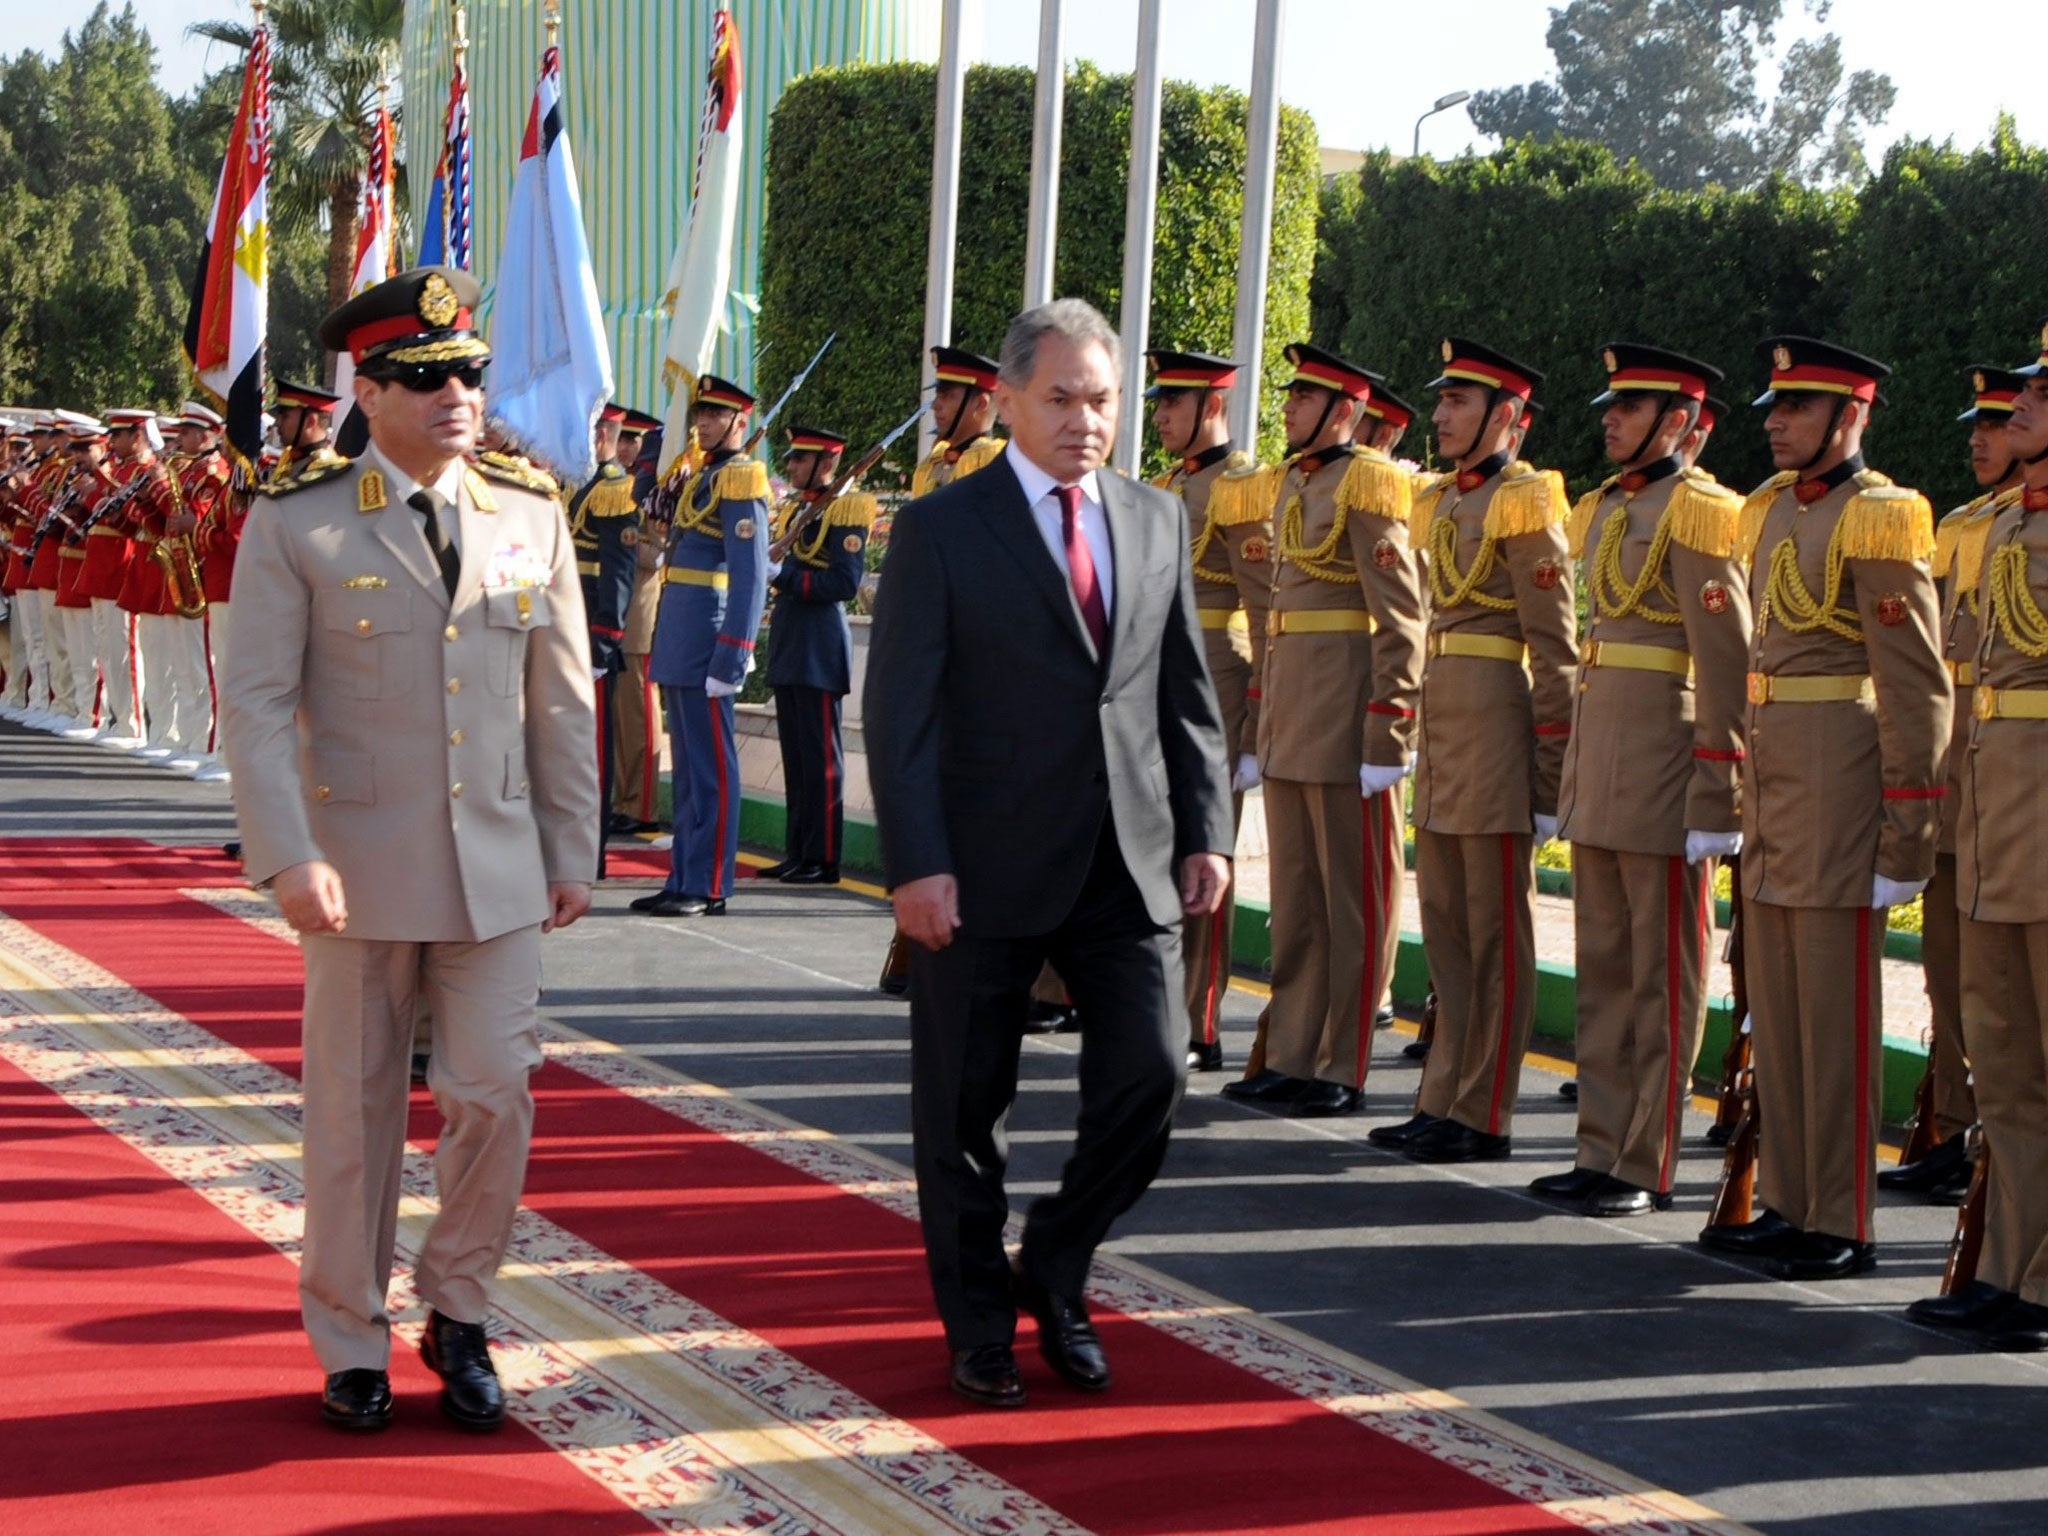 Egypt's Defence Minister Abdel Fattah el-Sisi (left) and his Russian counterpart Sergei Shoigu review guards before their meeting in Cairo